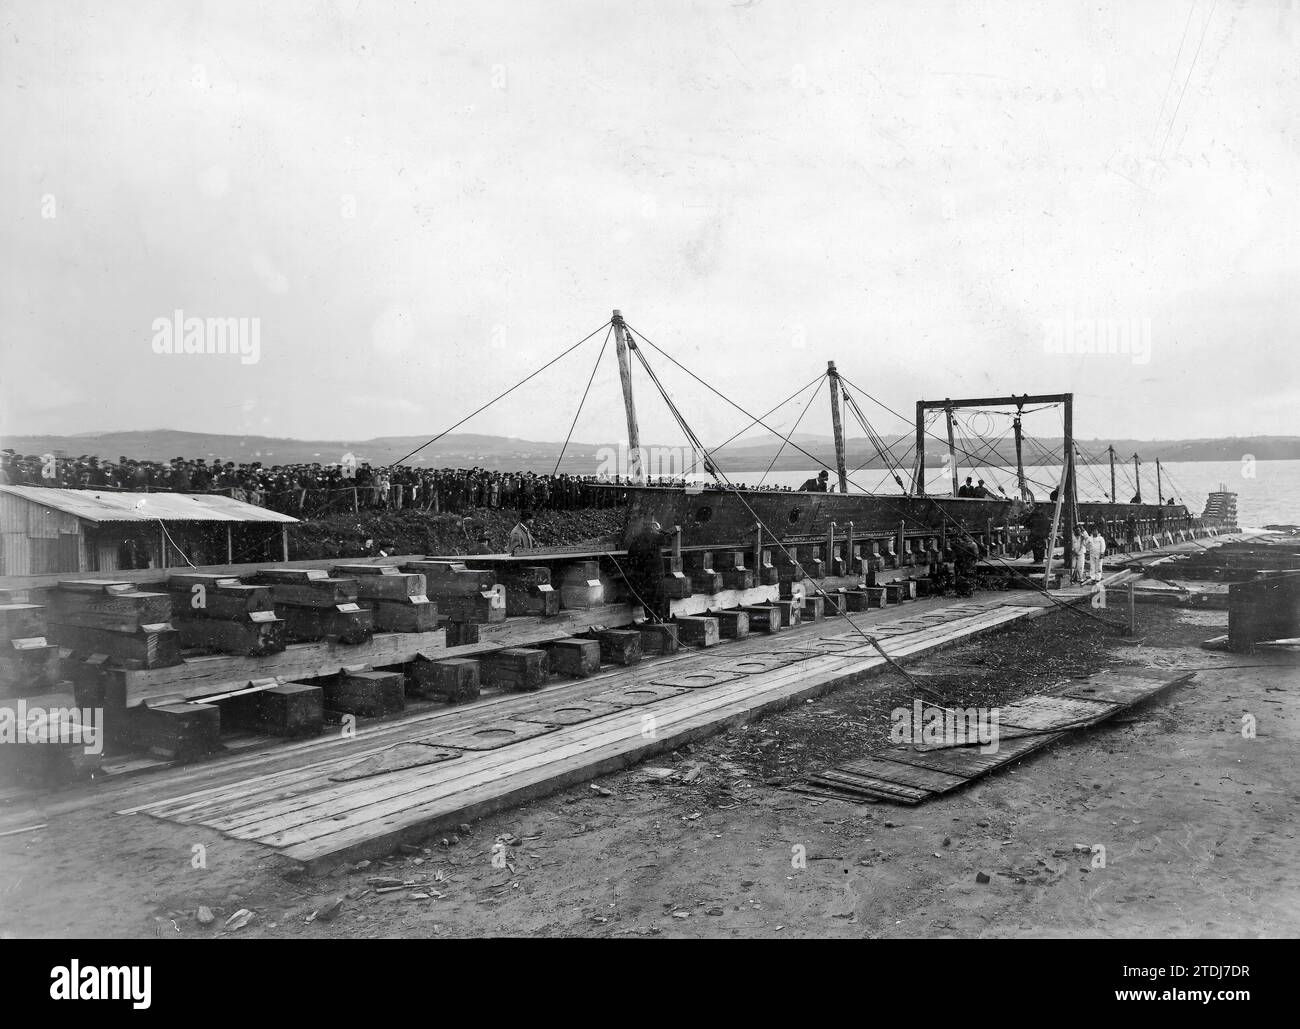 11/30/1909. The Ferrol arsenal. Laying of the keel of the Battleship 'Spain'. -approximate date. Credit: Album / Archivo ABC / Rey Stock Photo